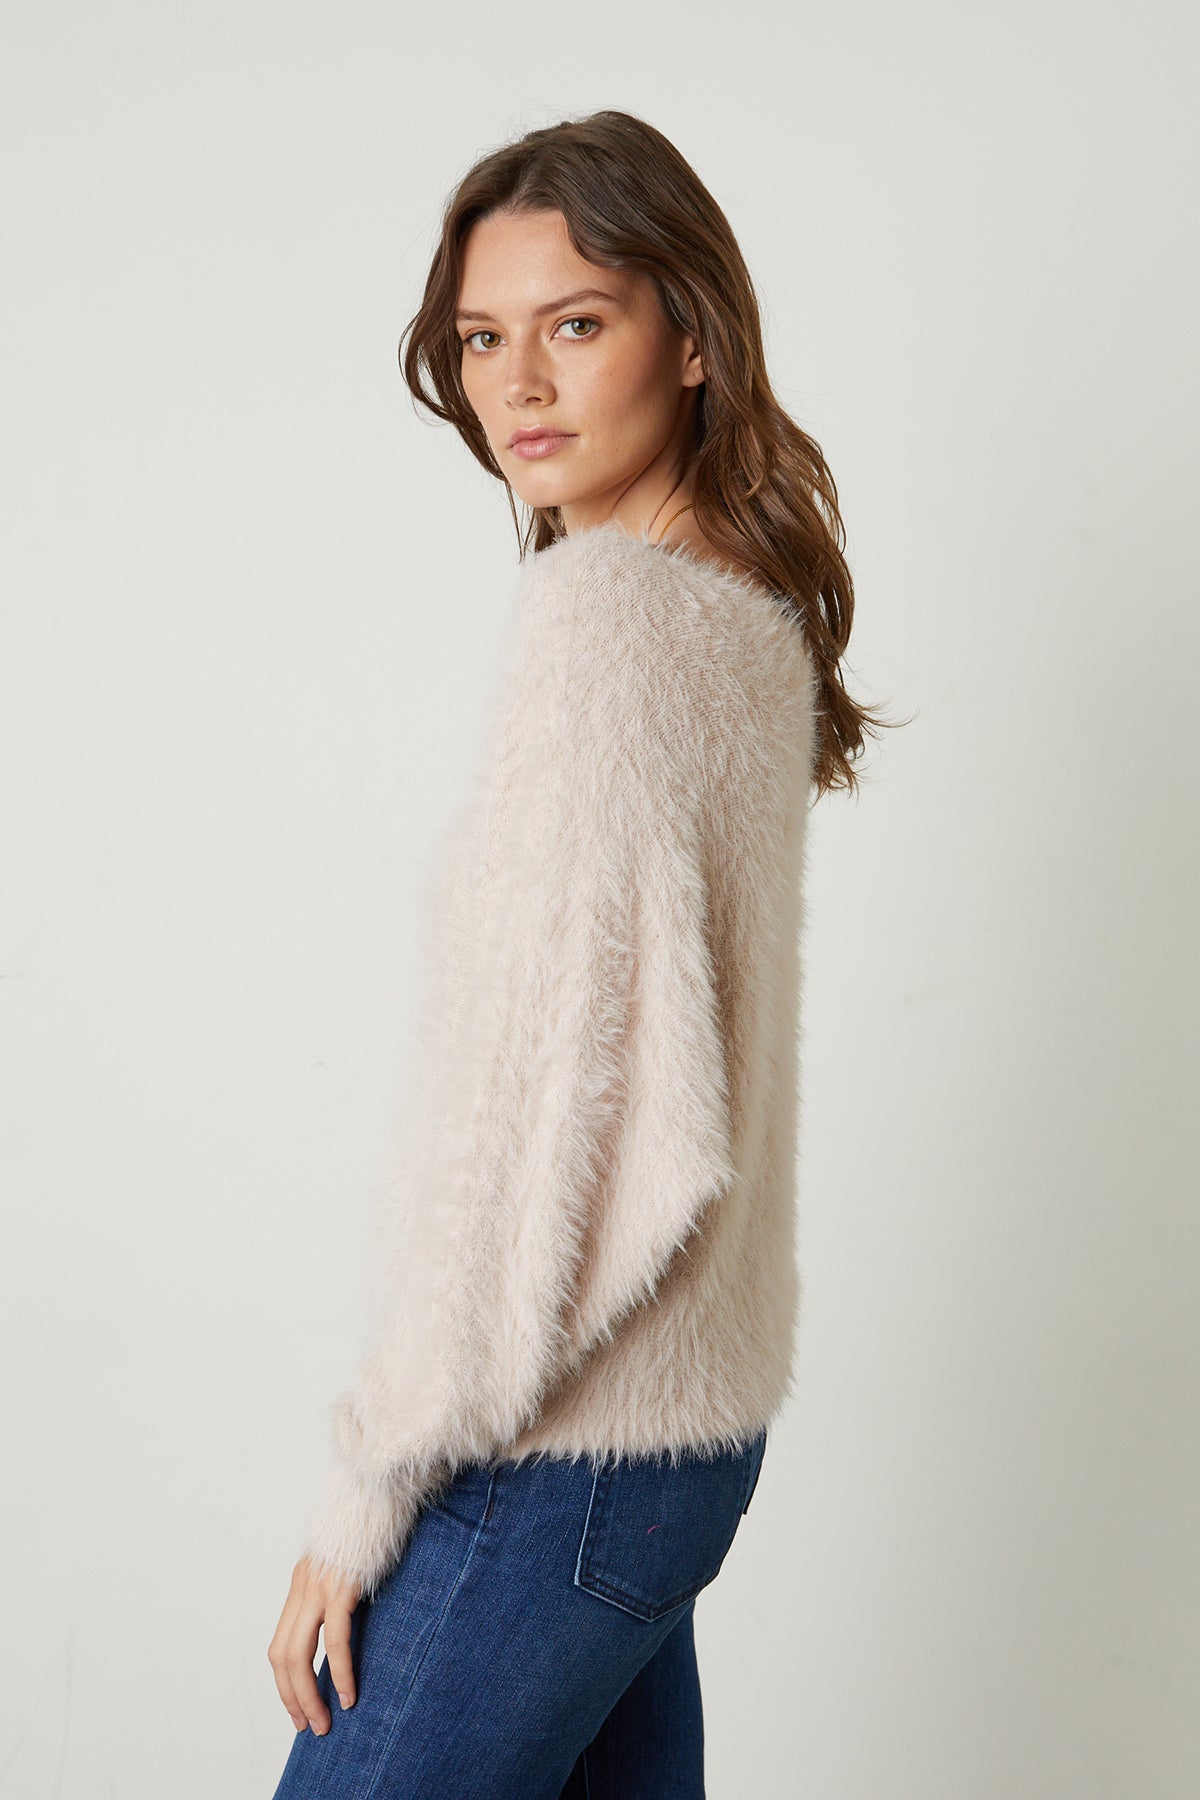 Betty Feather Yarn Boat Neck Sweater in pale blush pink side-25548650807489